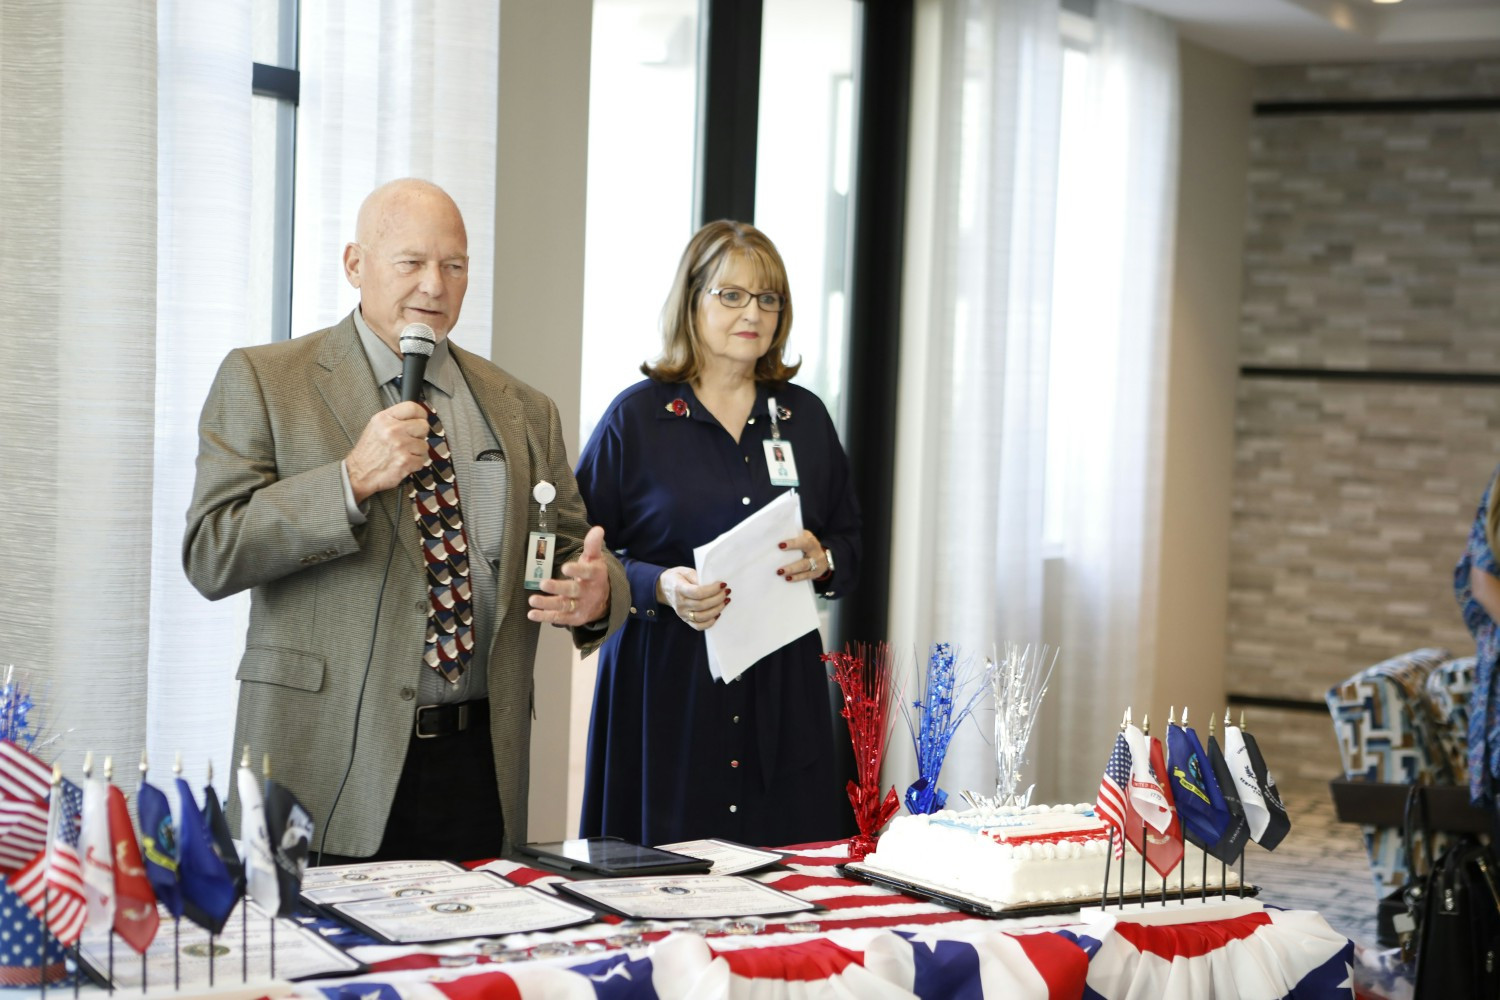 Acacia's Spiritual Counselor and Director of Business Development at Acacia's Honoring Veterans event.